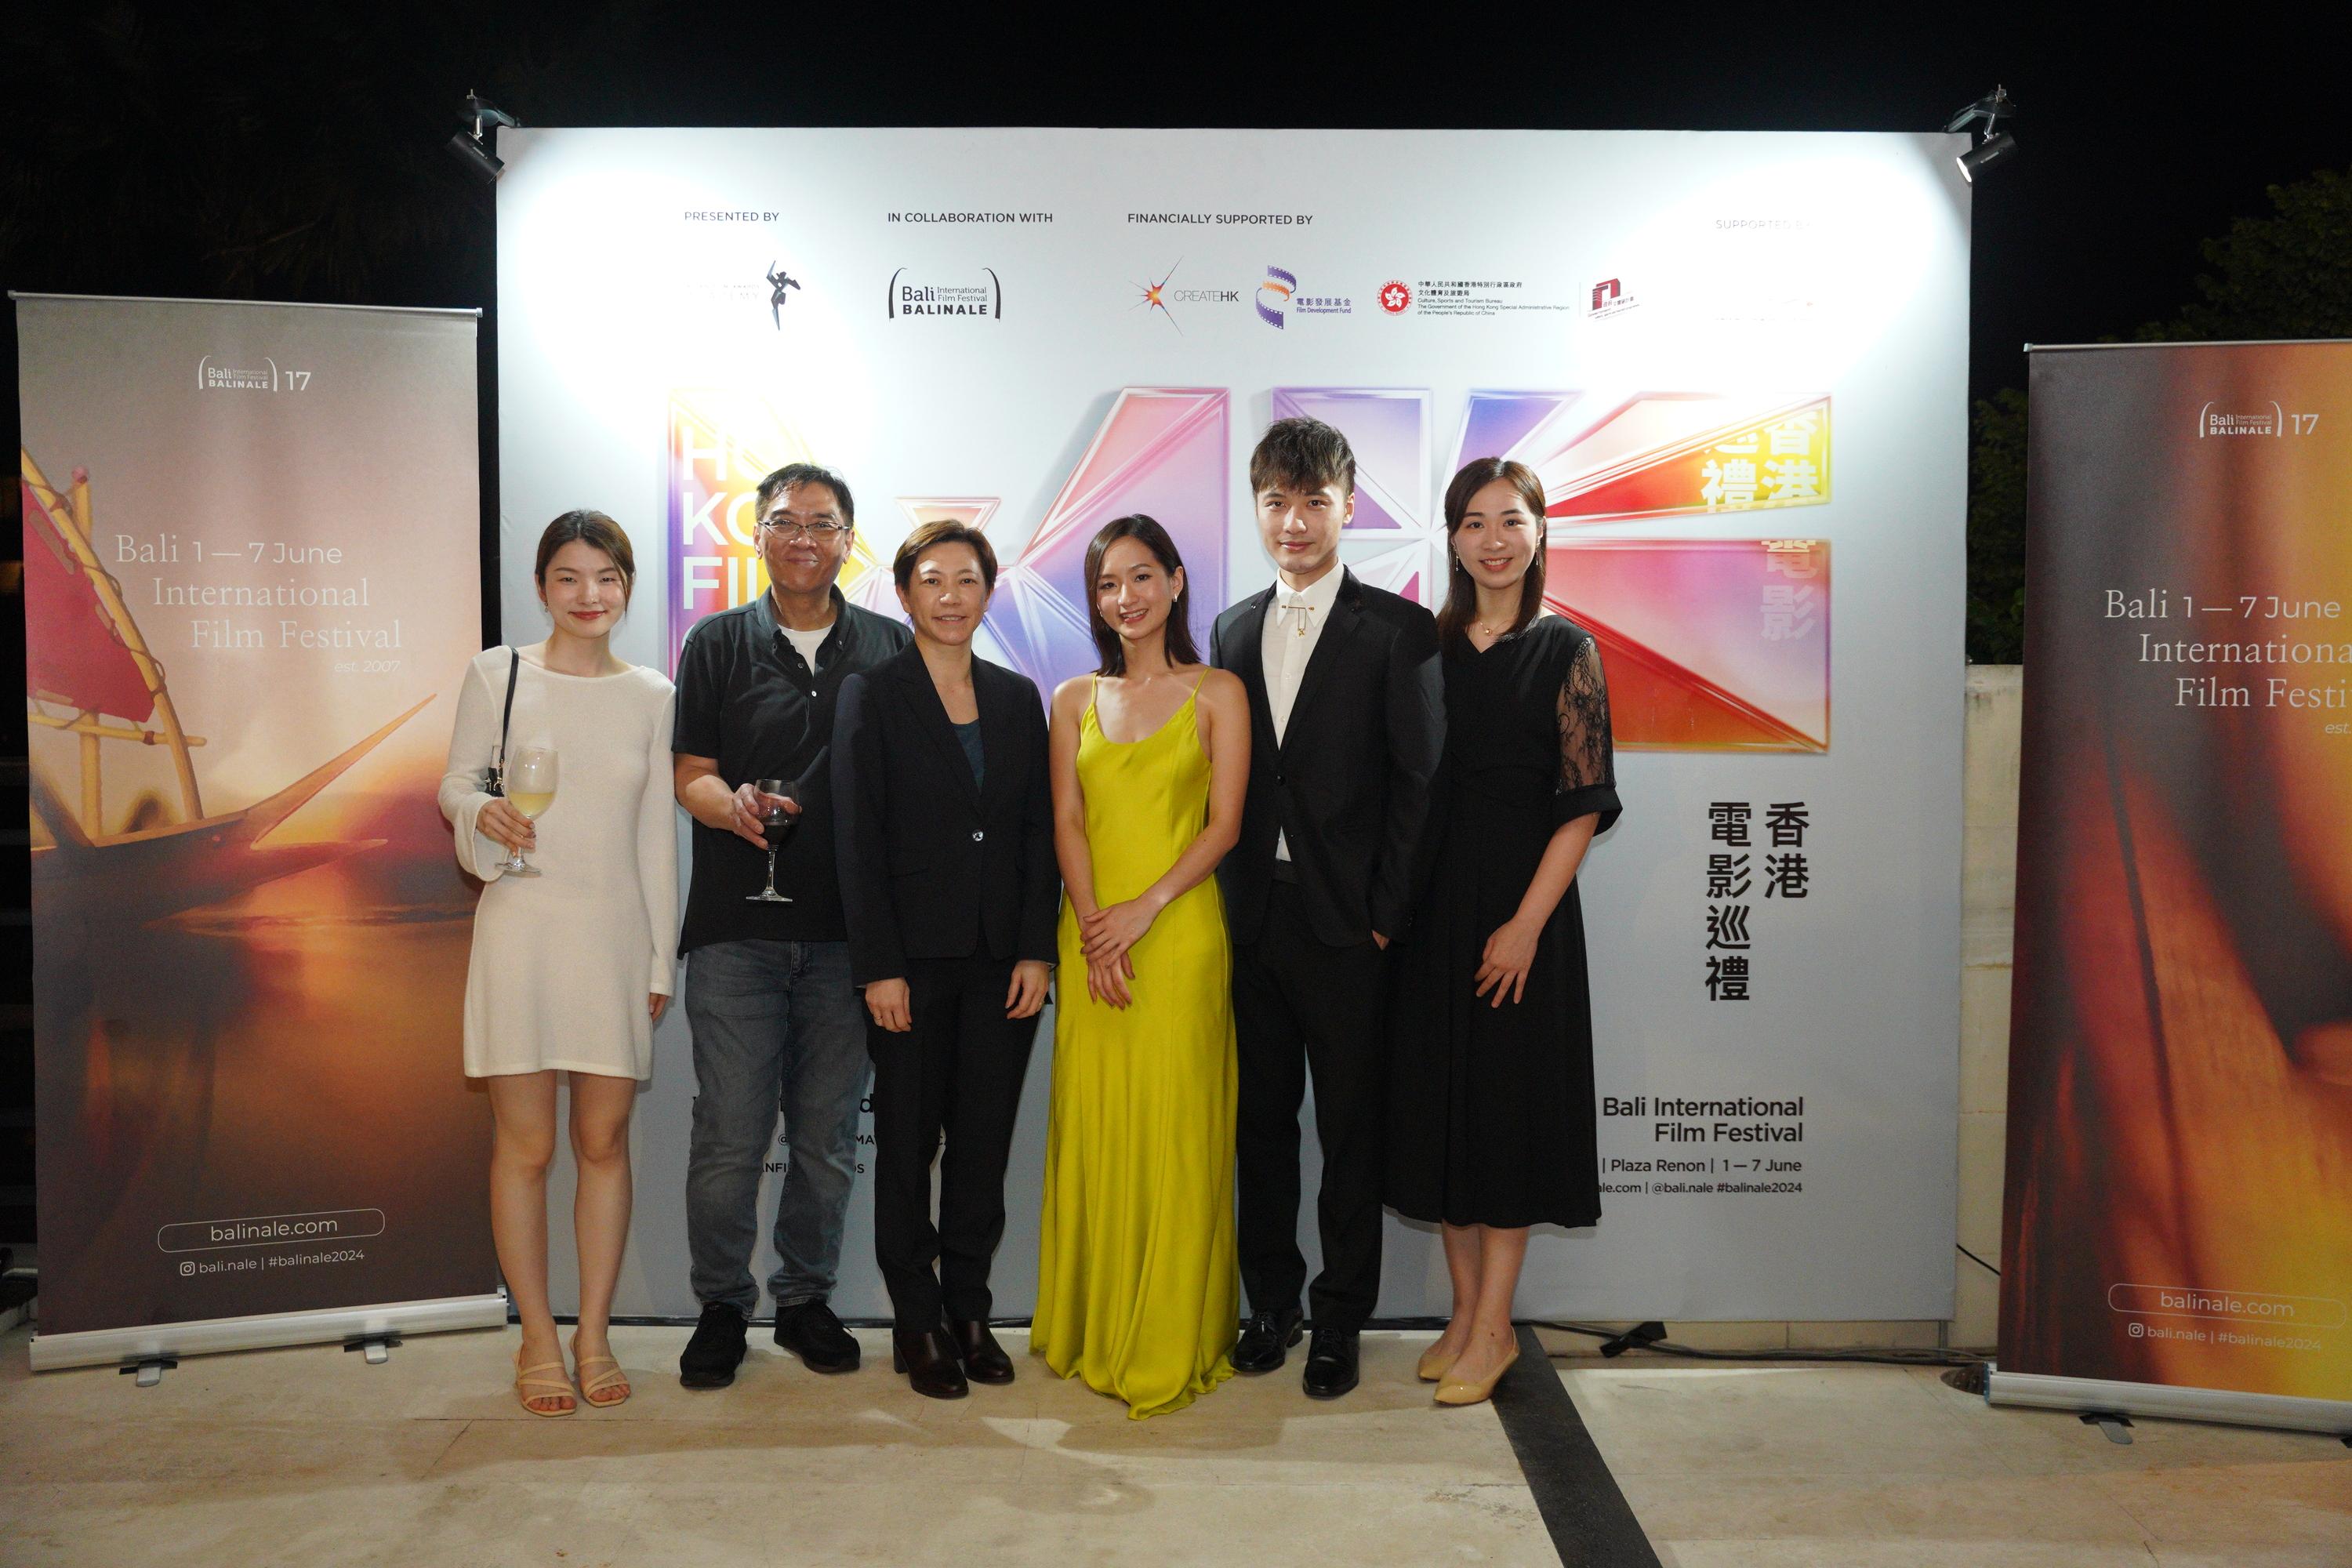 The Hong Kong Economic and Trade Office, Jakarta (HKETO Jakarta) collaborated with the Asian Film Awards Academy to participate in the 17th Bali International Film Festival in Bali, Indonesia. Photo shows the Director-General of the HKETO Jakarta, Miss Libera Cheng (third left), with the Hong Kong filmmakers at the opening reception today (June 1).
